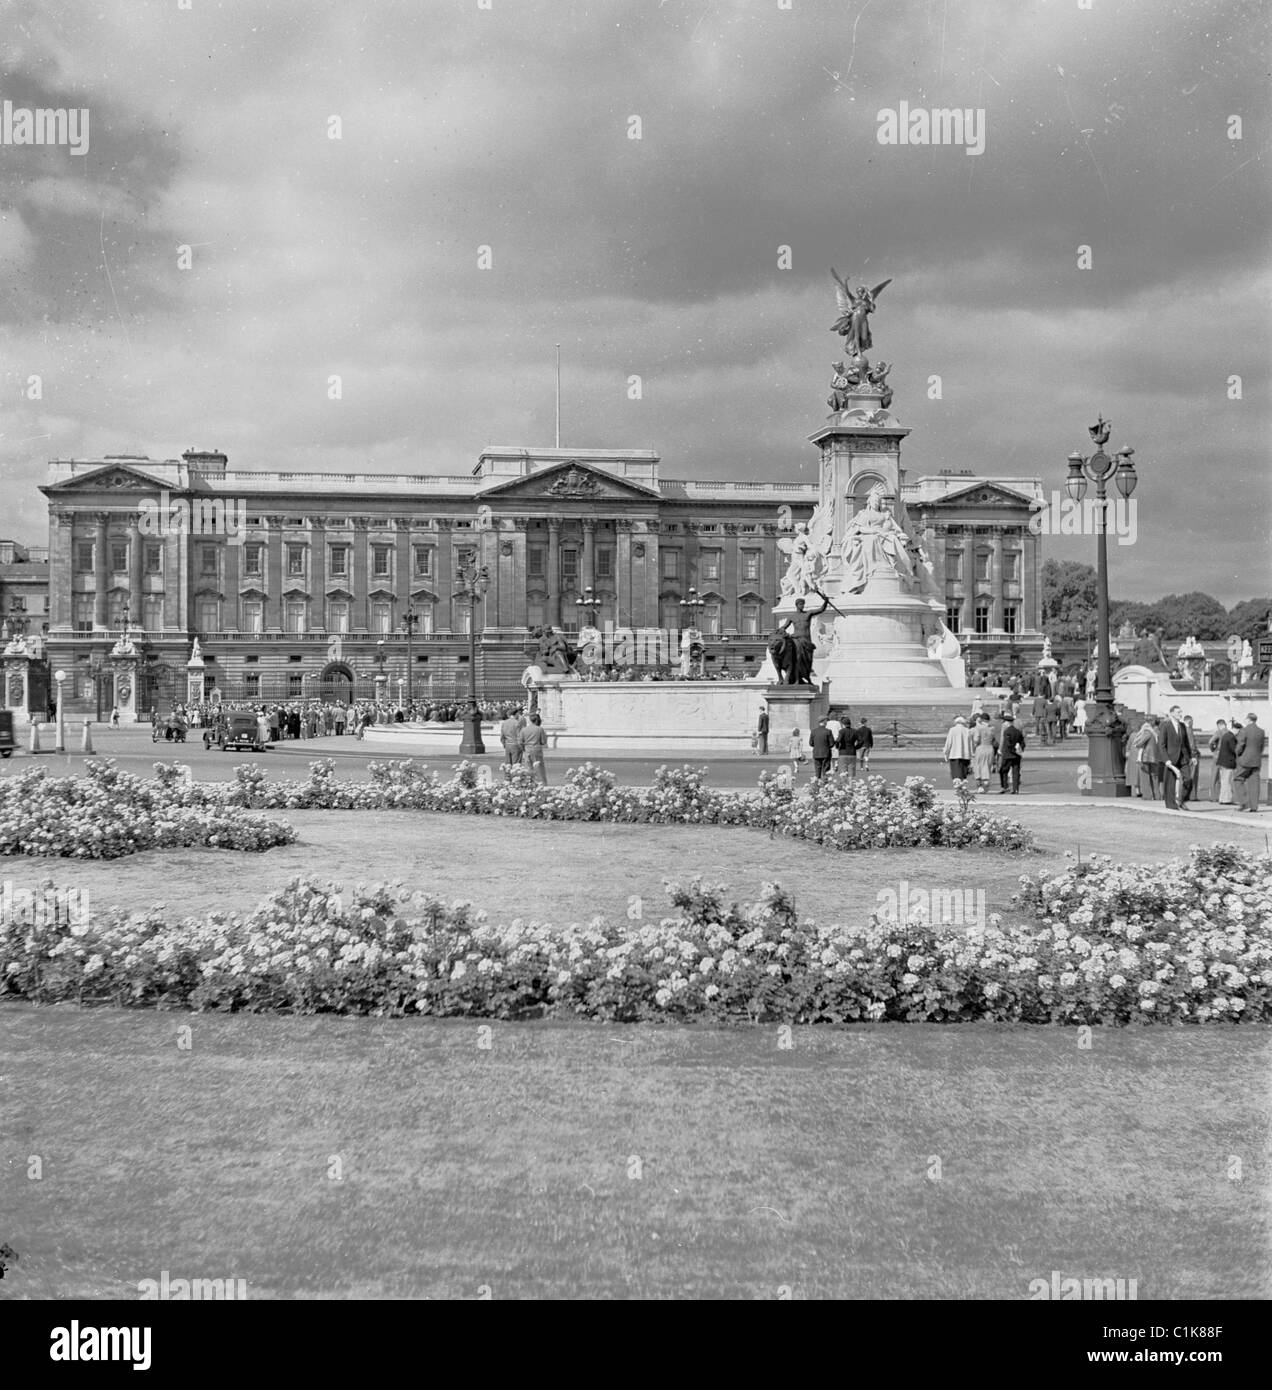 1950s, people at the Victoria Memorial on the Mall and at Buckingham Palace, a Royal Palace and the London residence of the British Royal family. Stock Photo